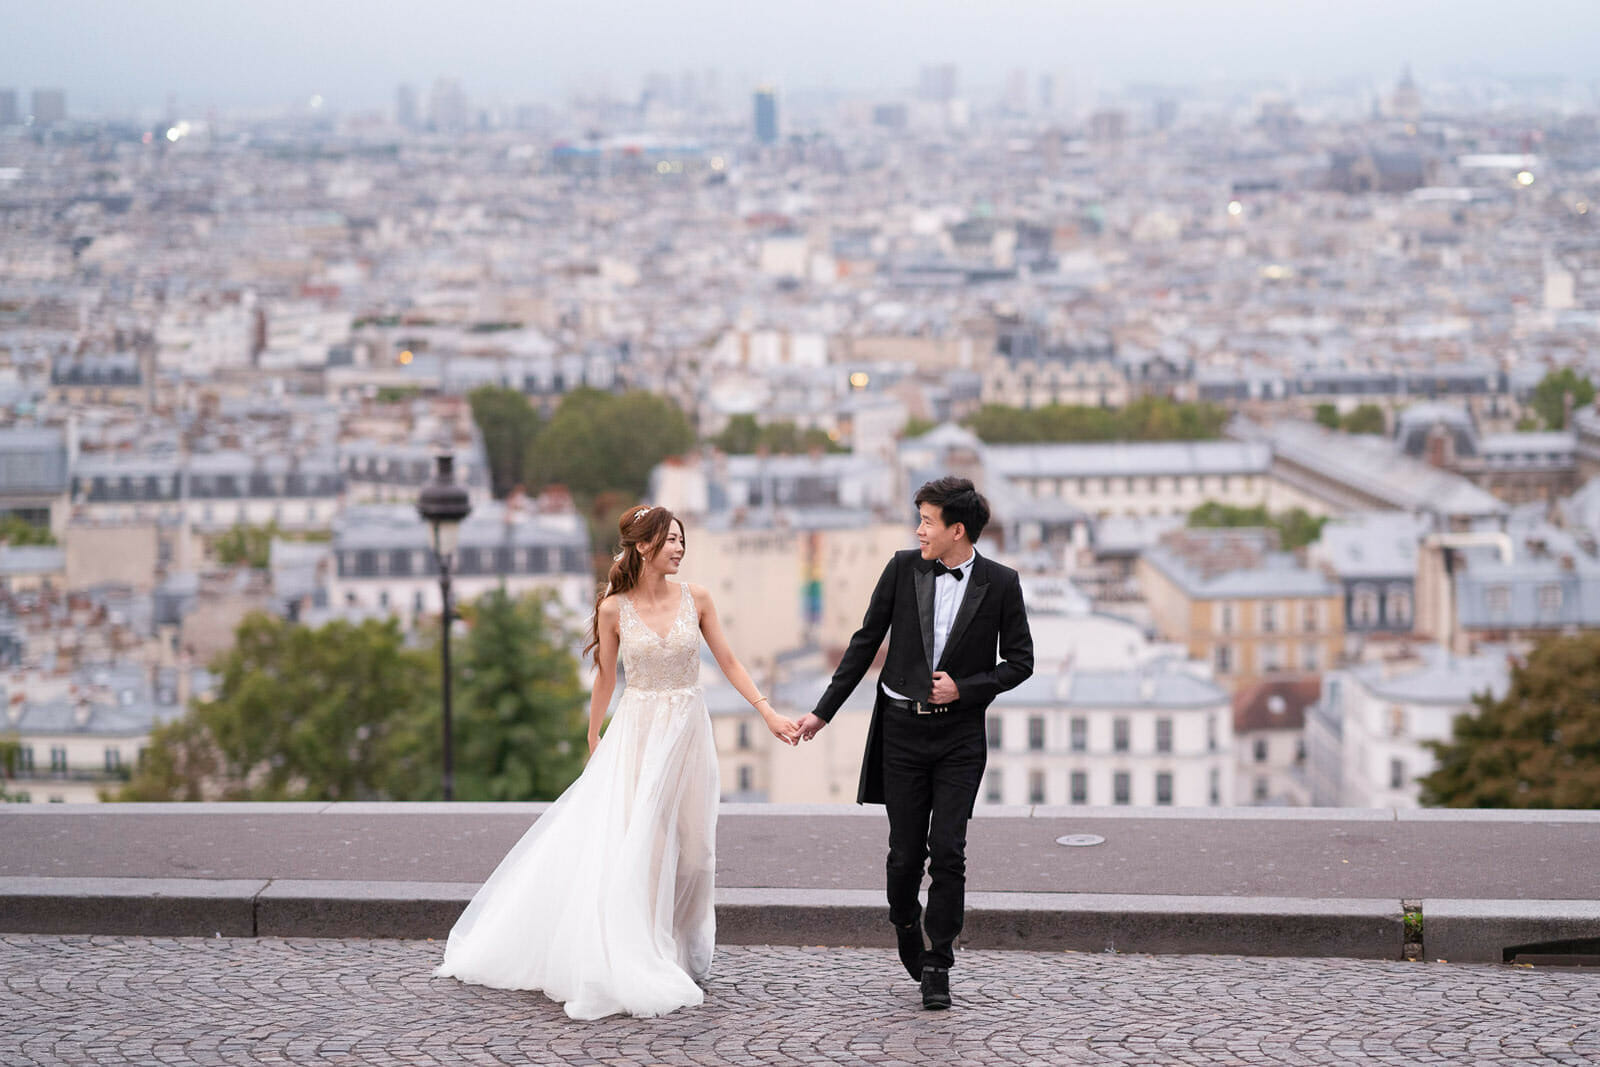 Pre-wedding photoshoot at sunrise at Montmartre near Sacre Coeur